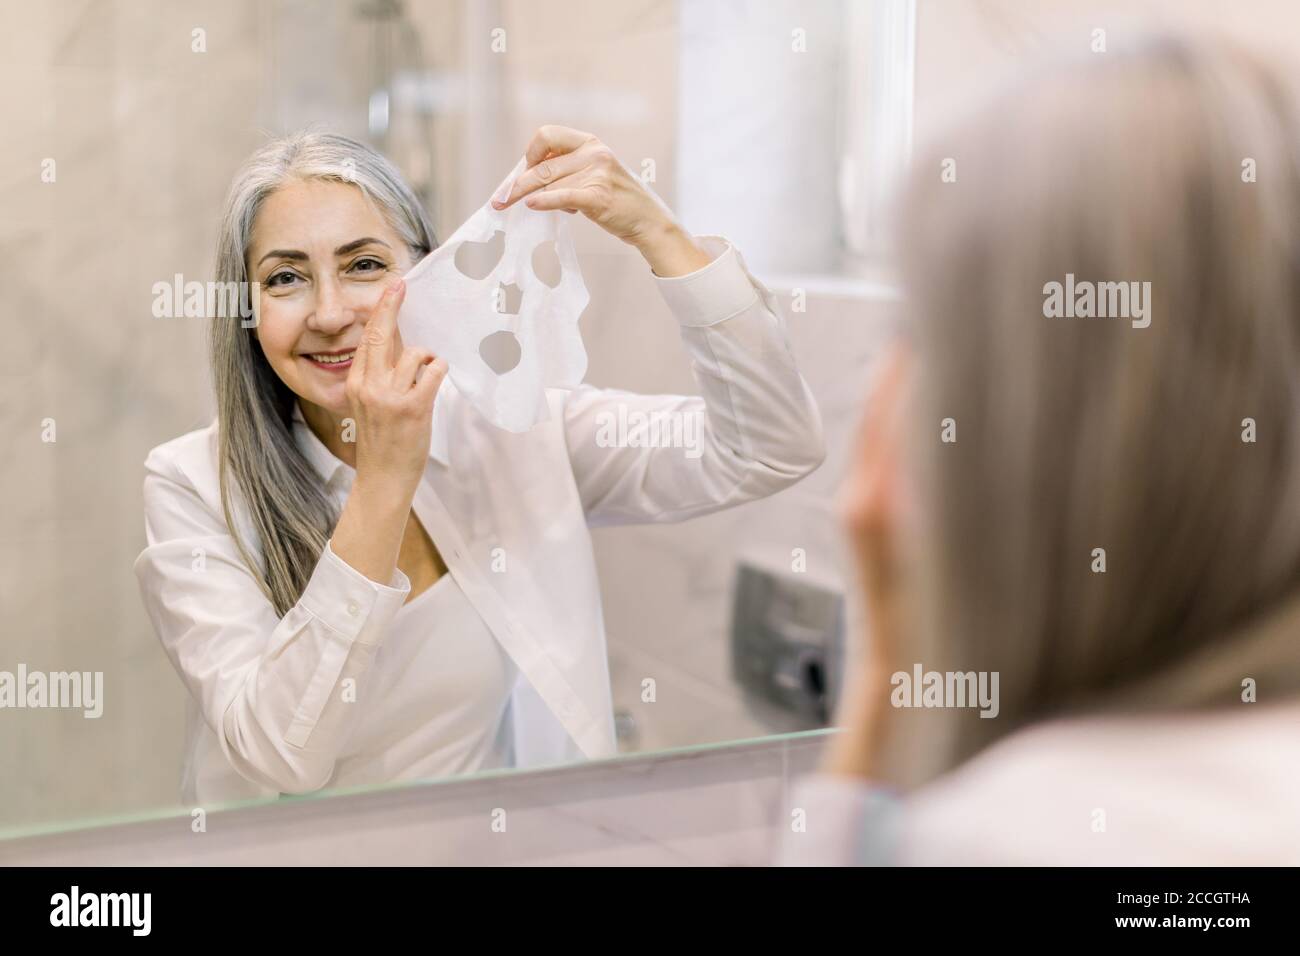 Smiling senior attractive woman is applying sheet mask on her face in the bathroom. Fabric cloth face mask to improve skin condition with antiage Stock Photo